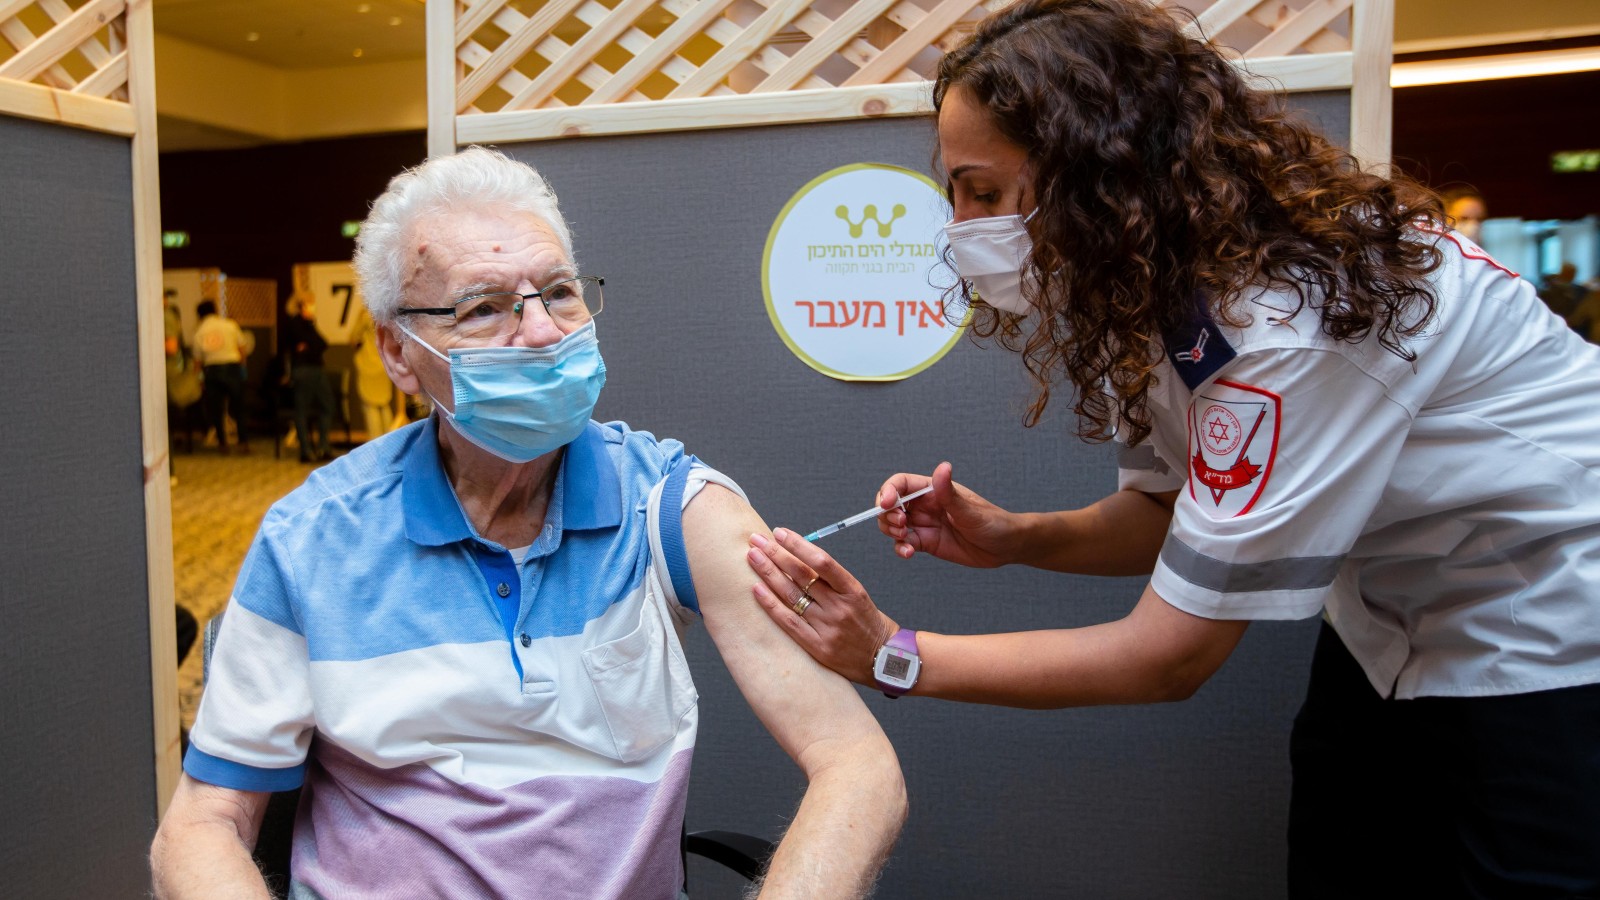 A MDA employee administers the first dose of the Covid-19 vaccine to a resident of Mediterranean Towers retirement community. Photo courtesy of Magen David Adom Spokesman’s Office